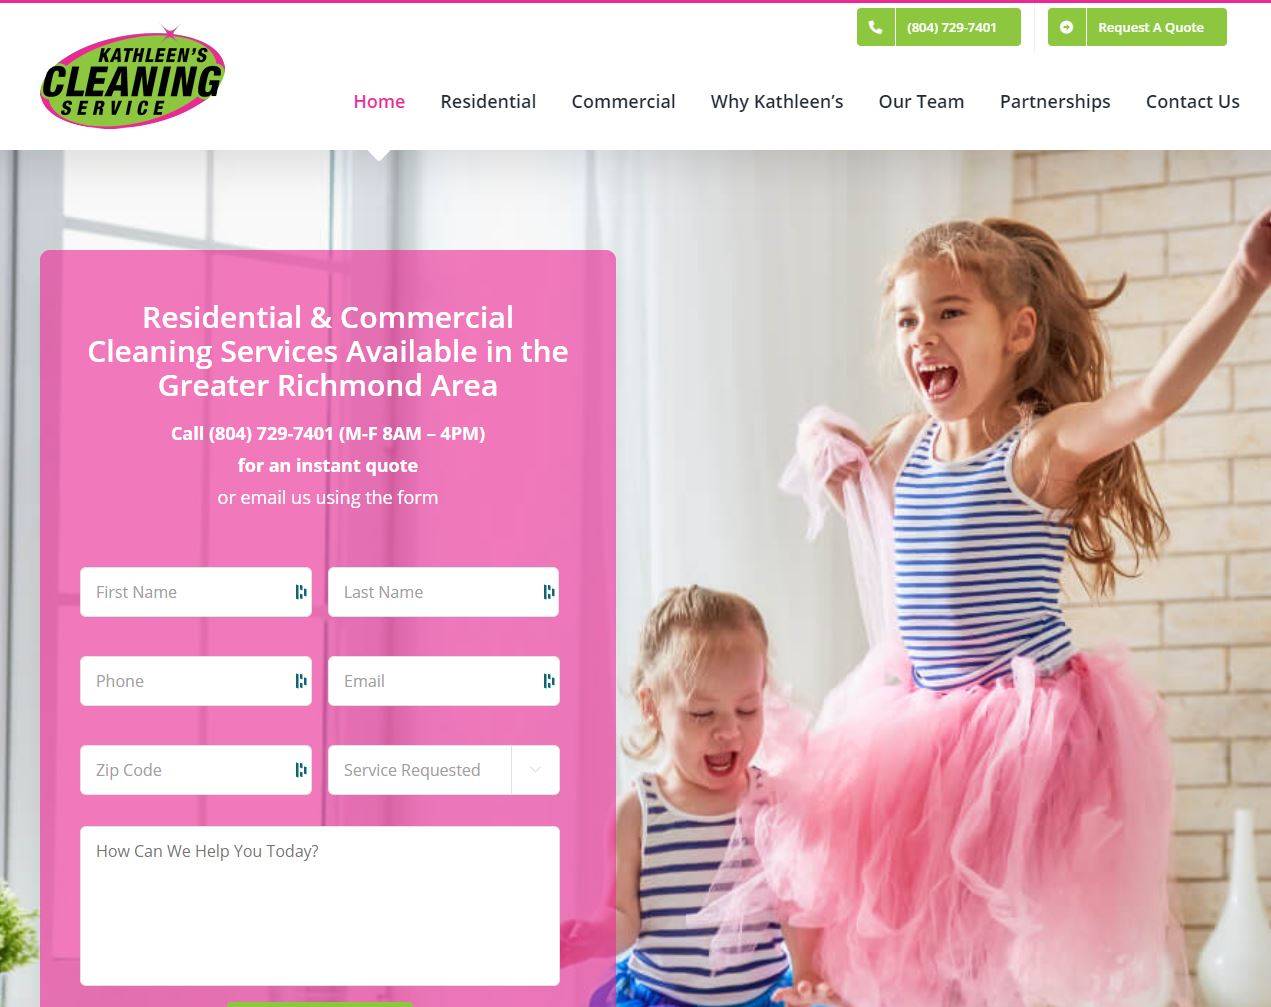 Website Design for Kathleen's Cleaning Service in Richmond, VA